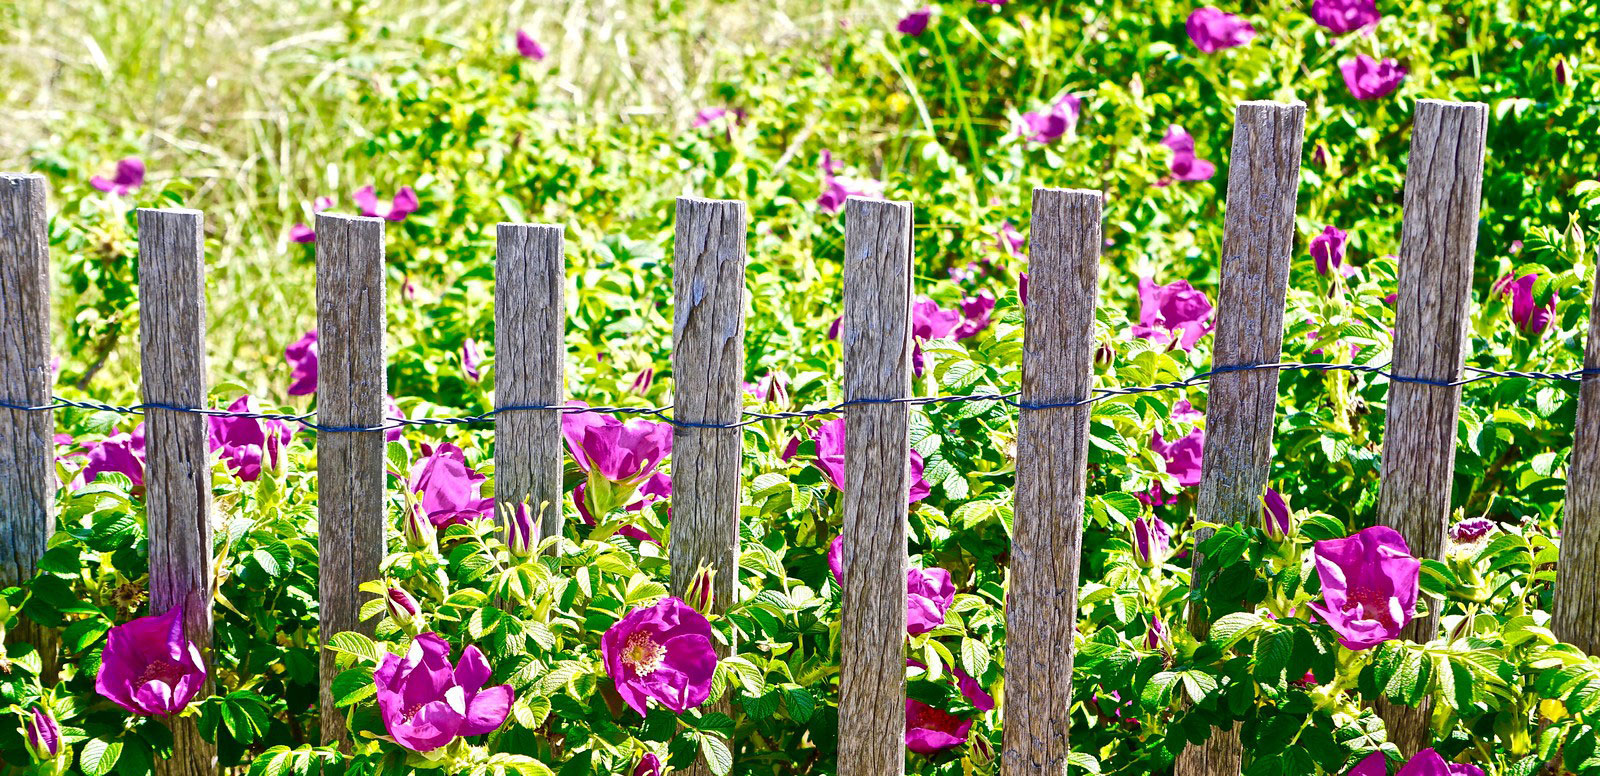 Blooming beach roses along a wood fence in Block Island, Rhode Island